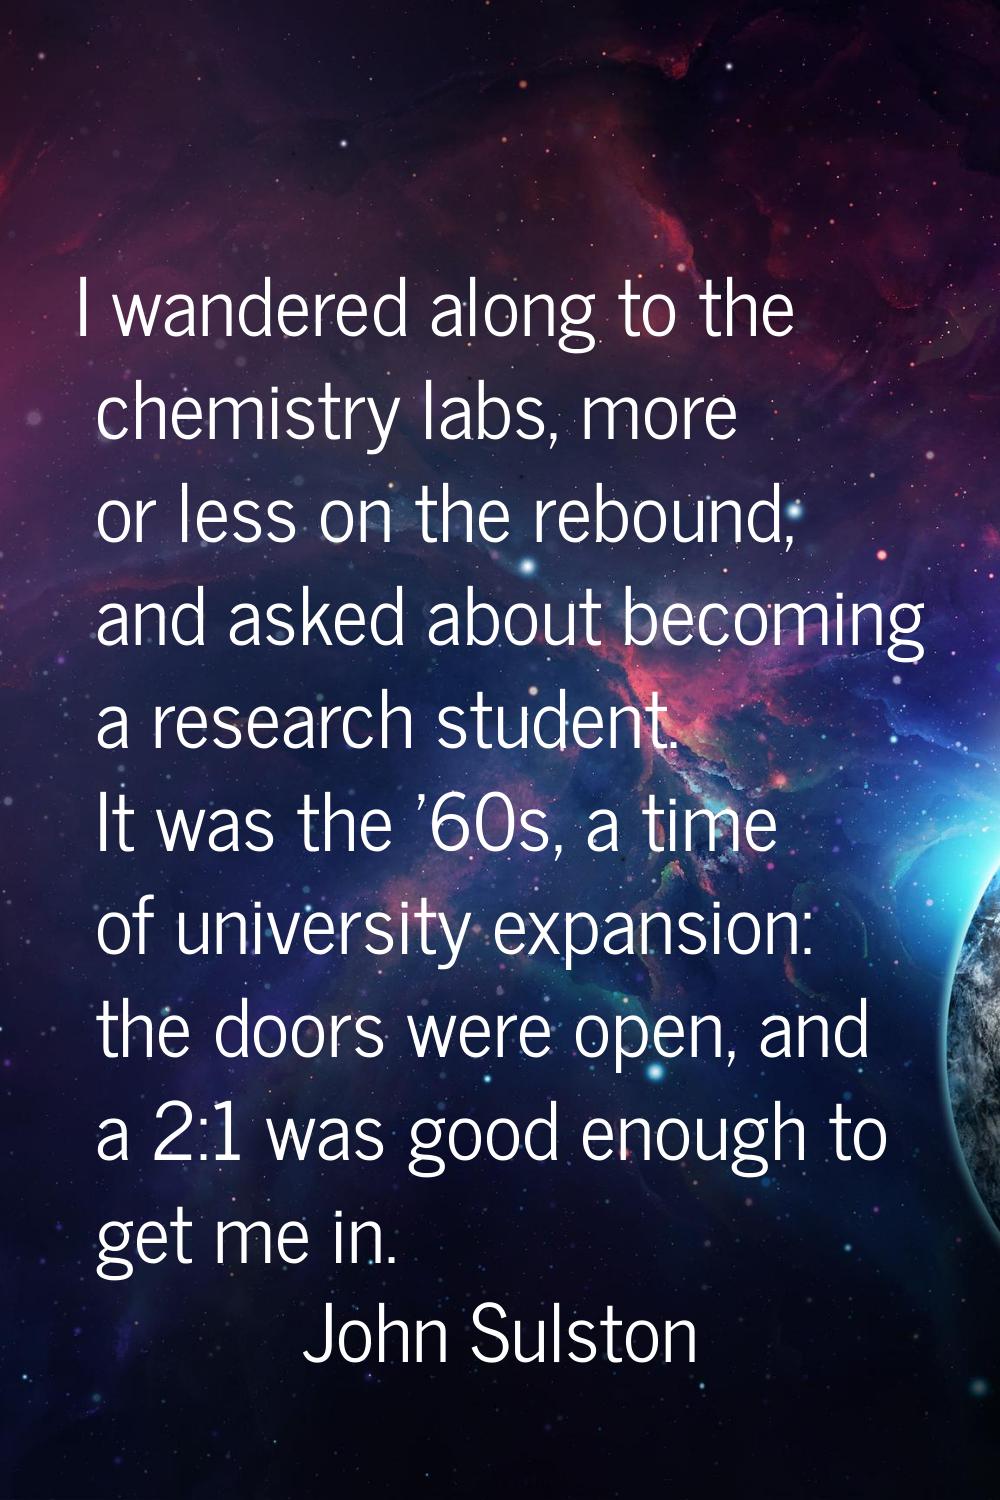 I wandered along to the chemistry labs, more or less on the rebound, and asked about becoming a res